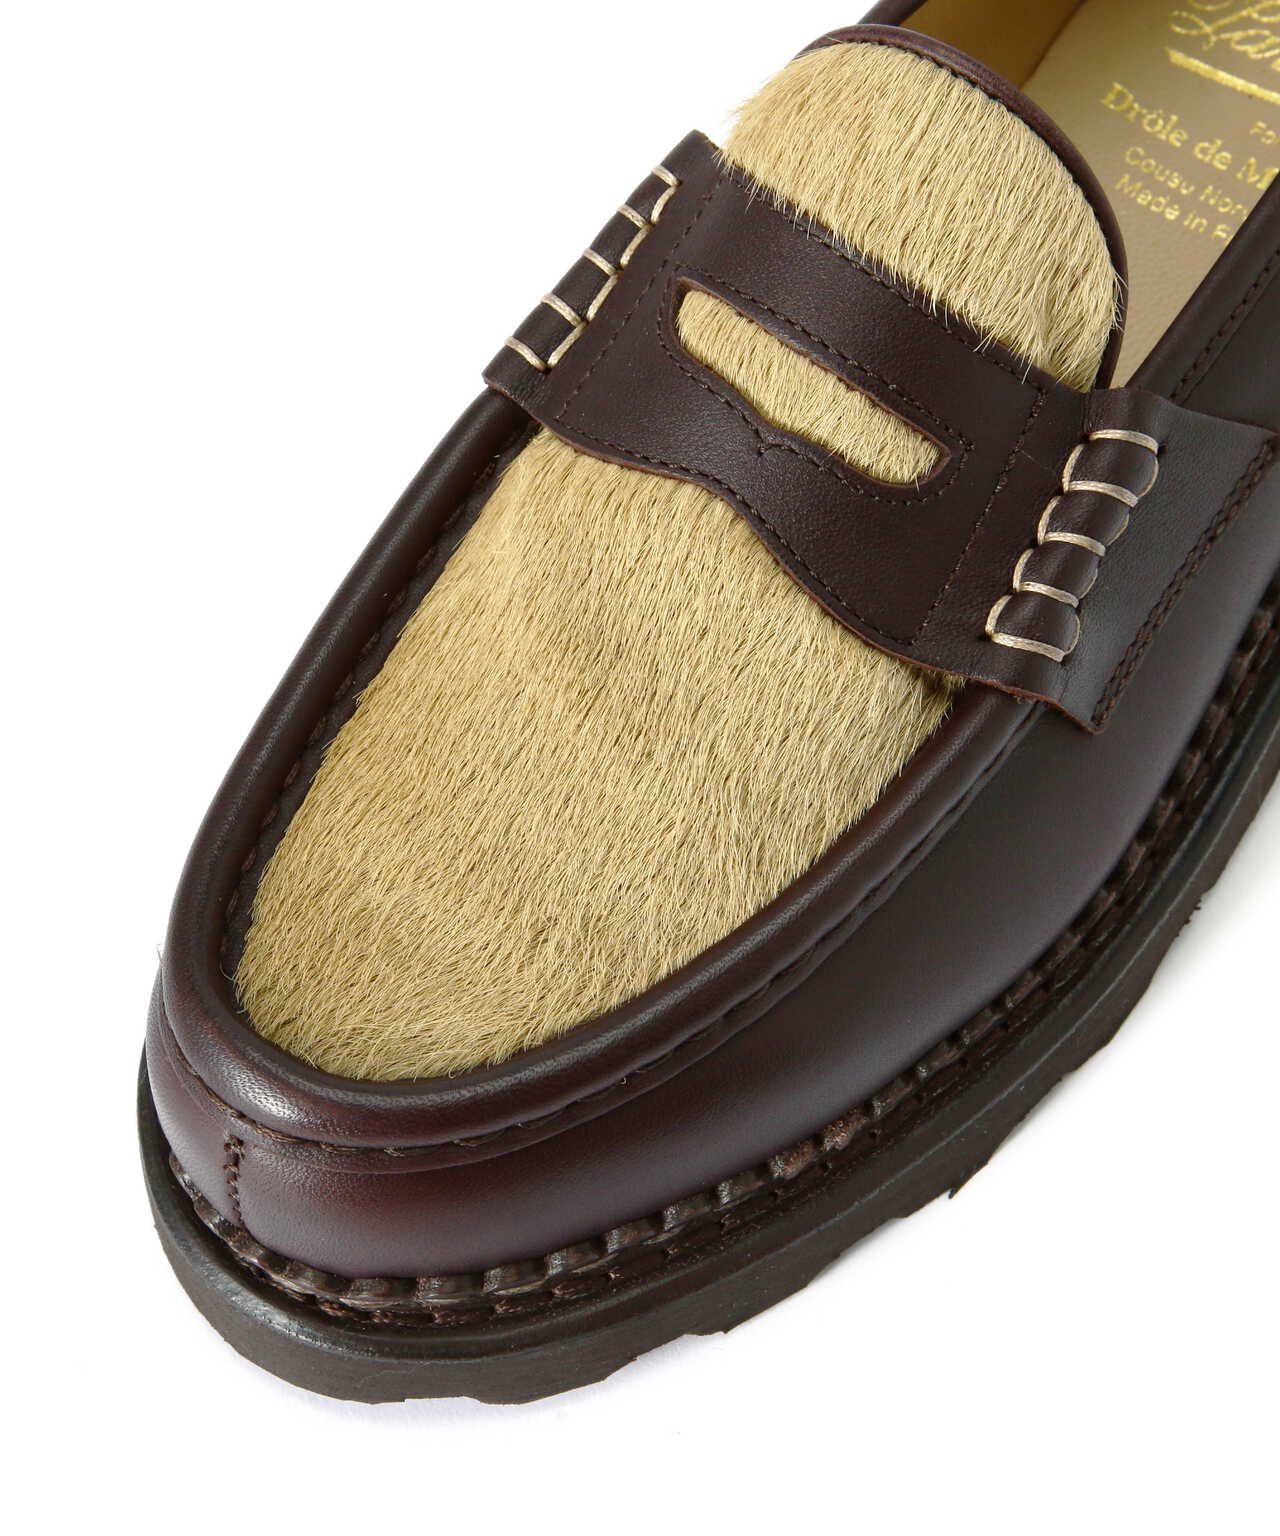 DROLE DE MONSIEUR X PARABOOT LOAFER(アウトレット商品・箱に傷あり 